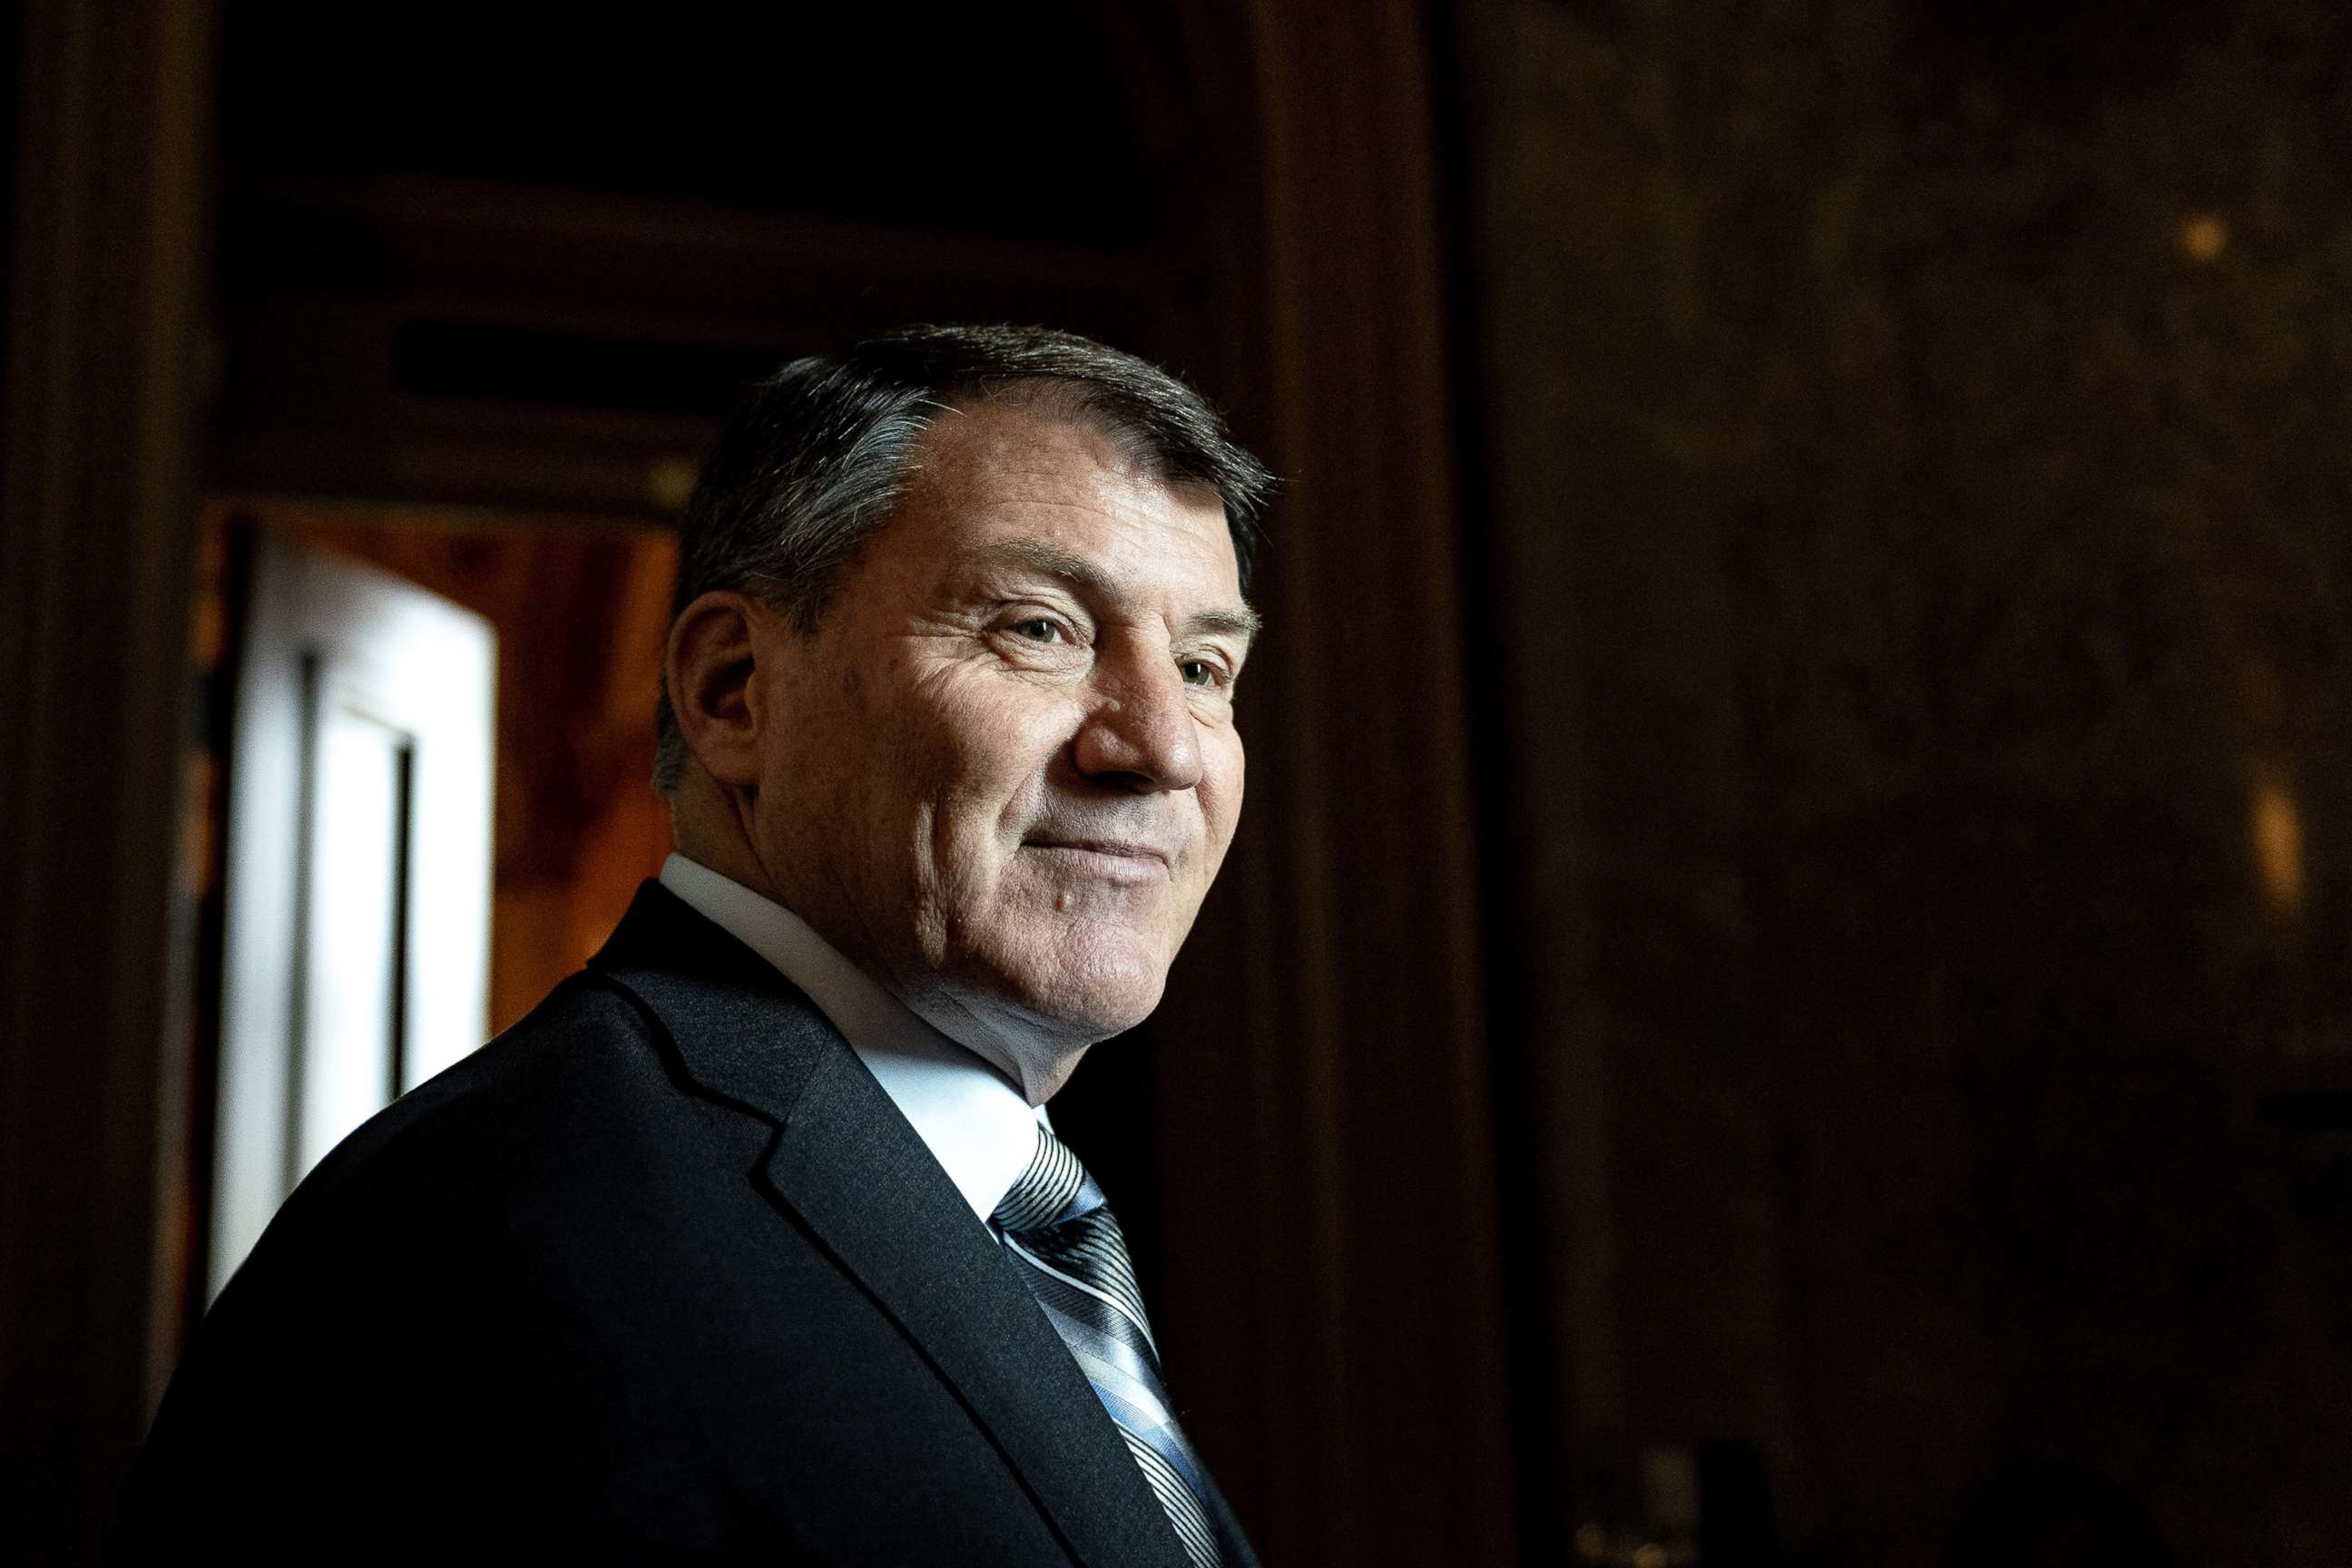 PHOTO: Sen. Mike Rounds walks to Senate Republican policy luncheons at the Capitol, Oct. 7, 2021.